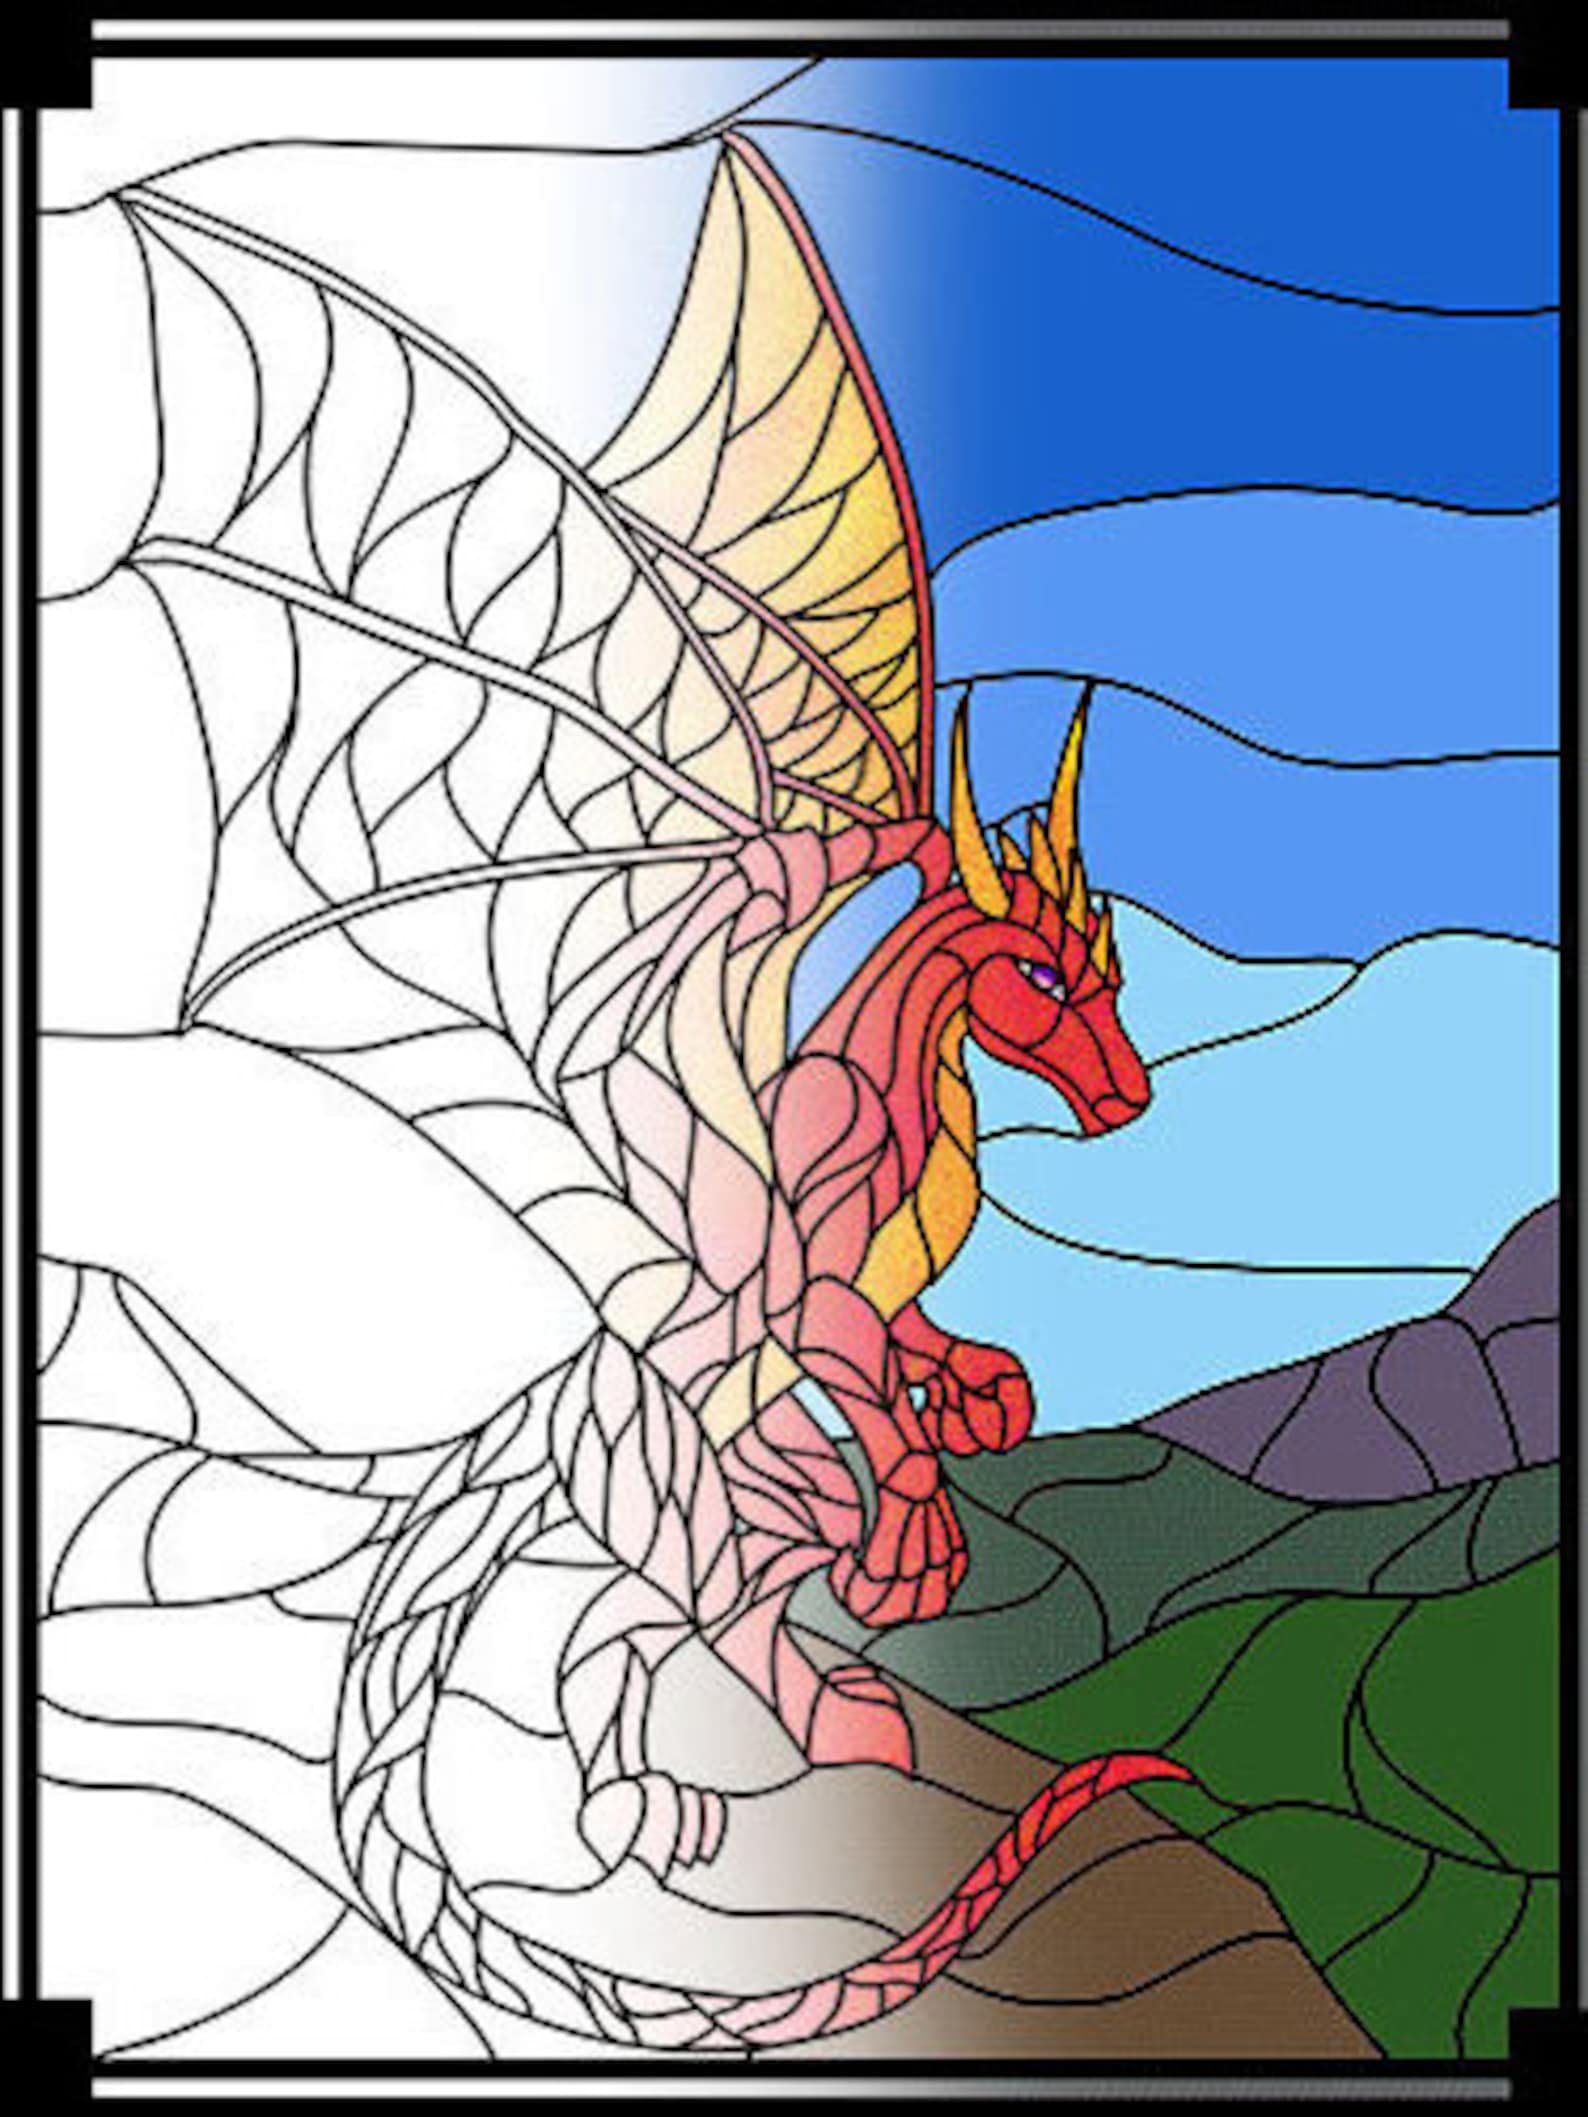 Stained Glass Dragon Adult or Kids Colouring Book Page or Real Stained Glas...